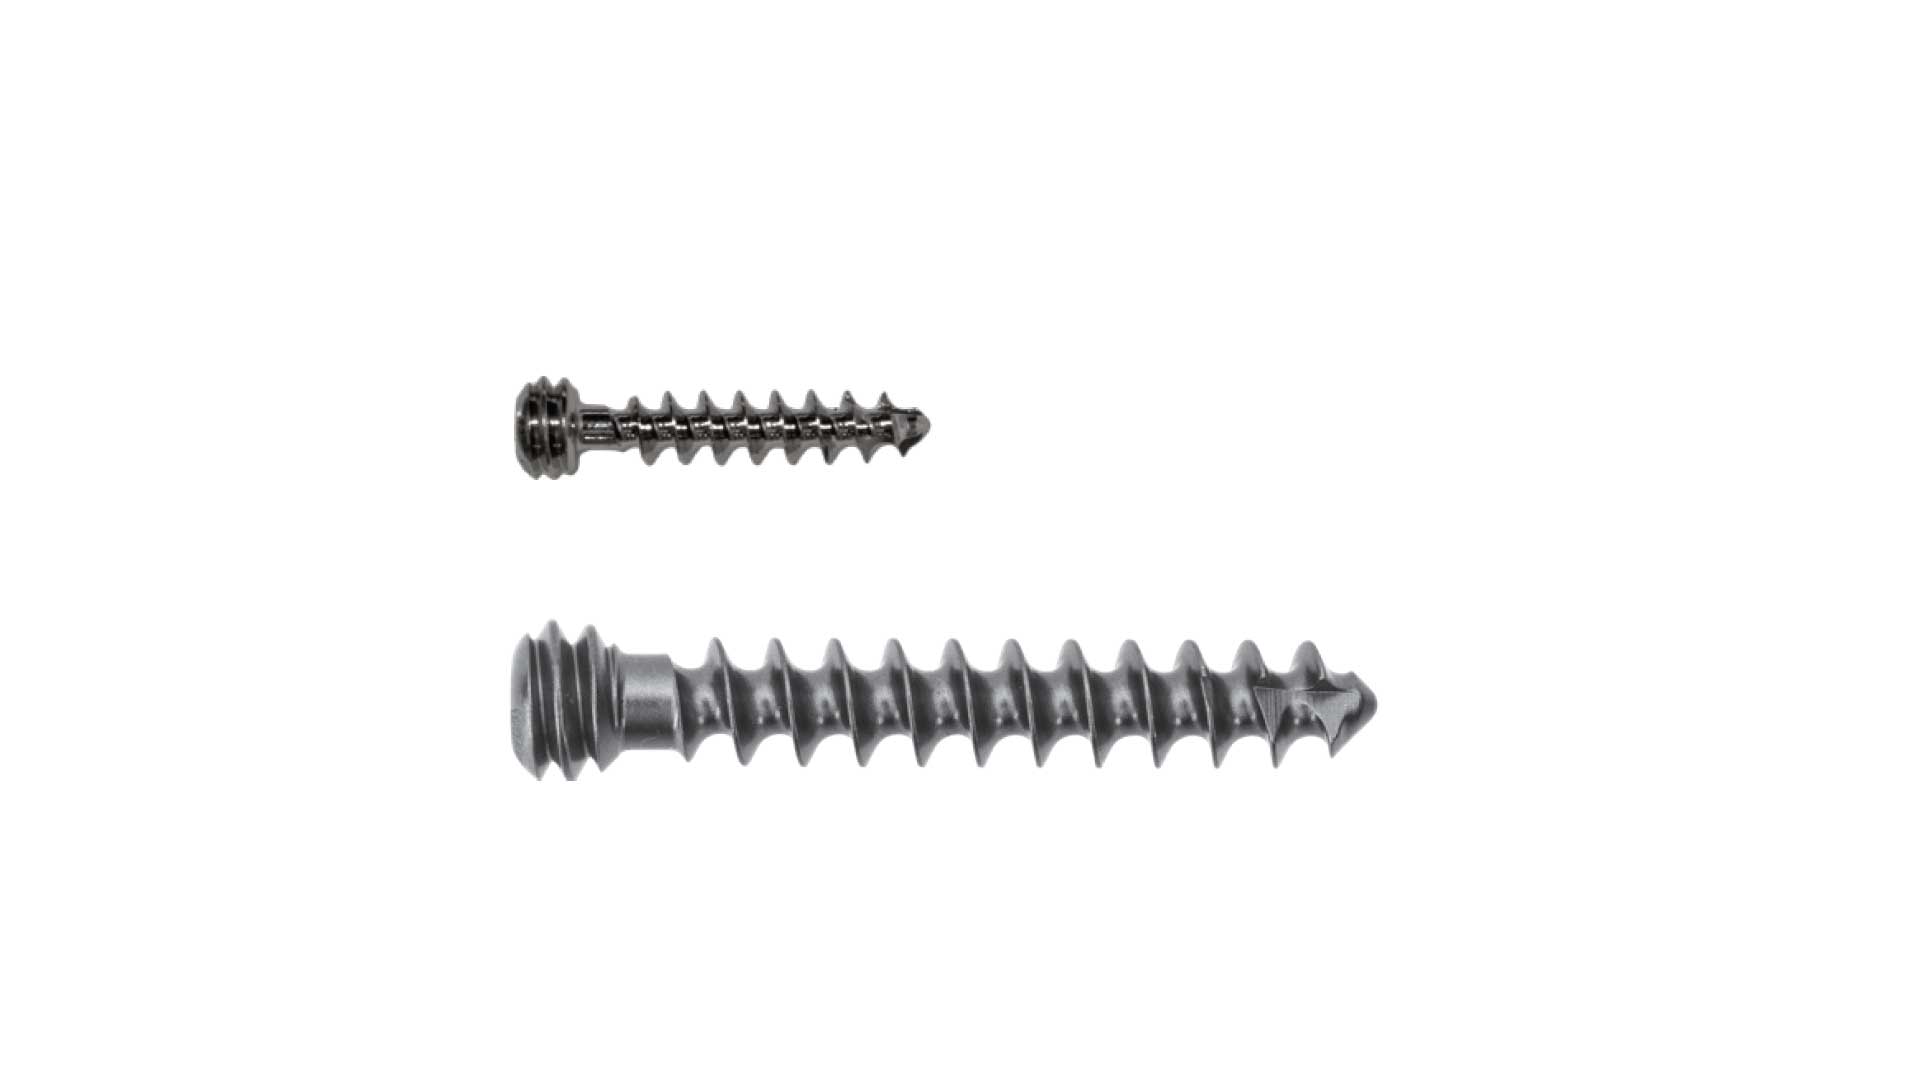 Königsee Implantate Products: Cancellous screws angle-stable; stainless steel, category Screws